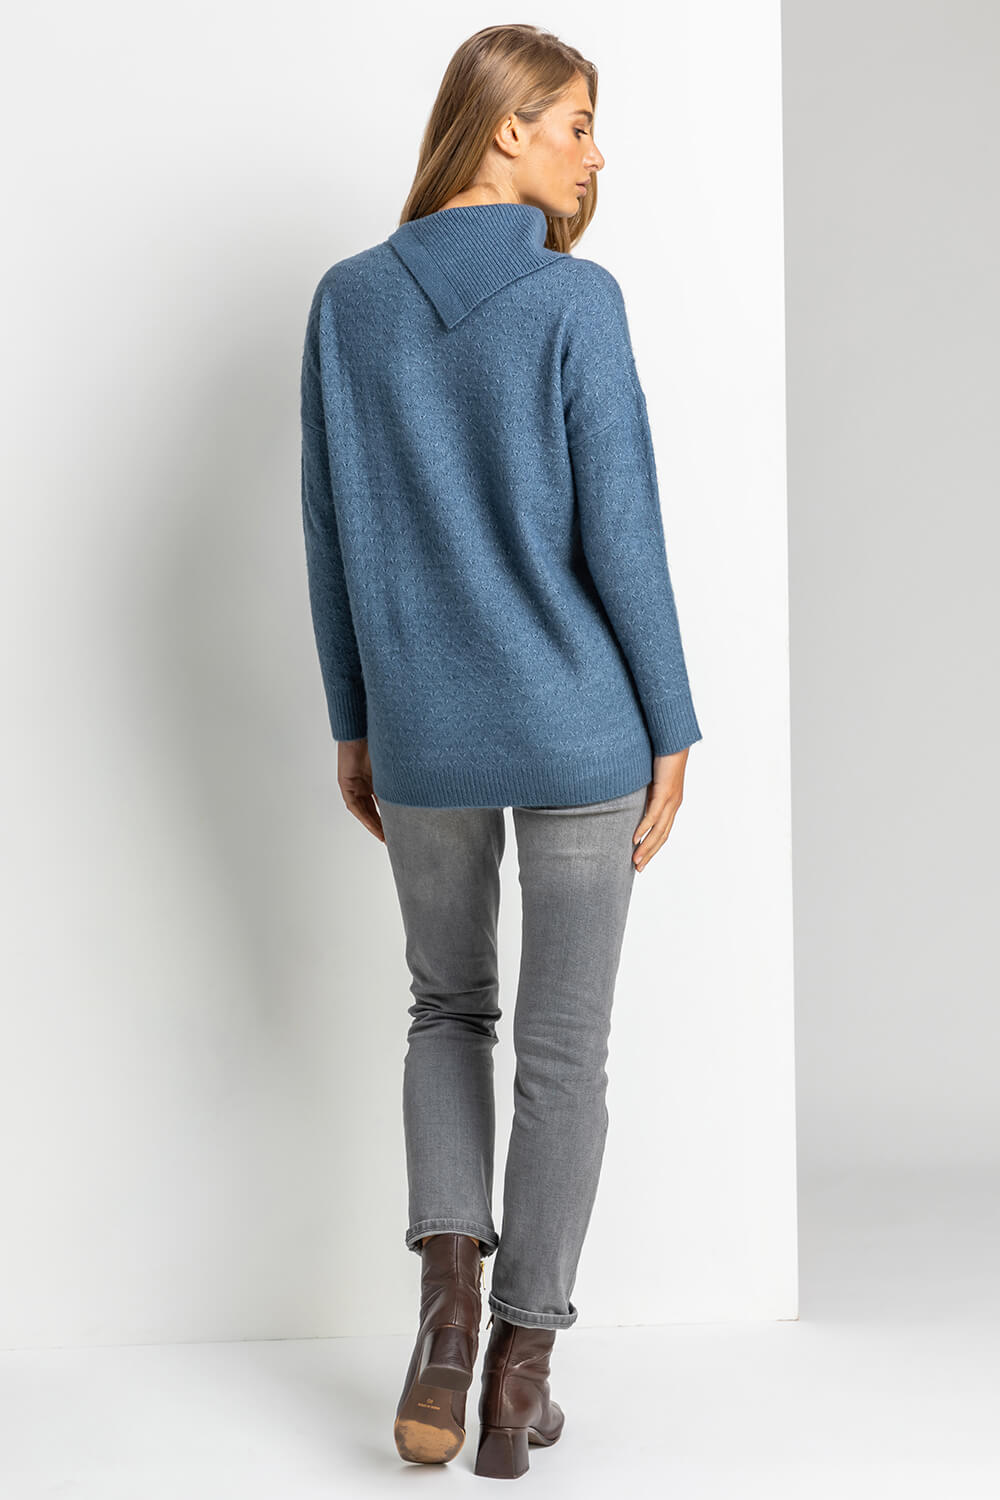 Blue Textured Cowl Neck Button Jumper, Image 2 of 5